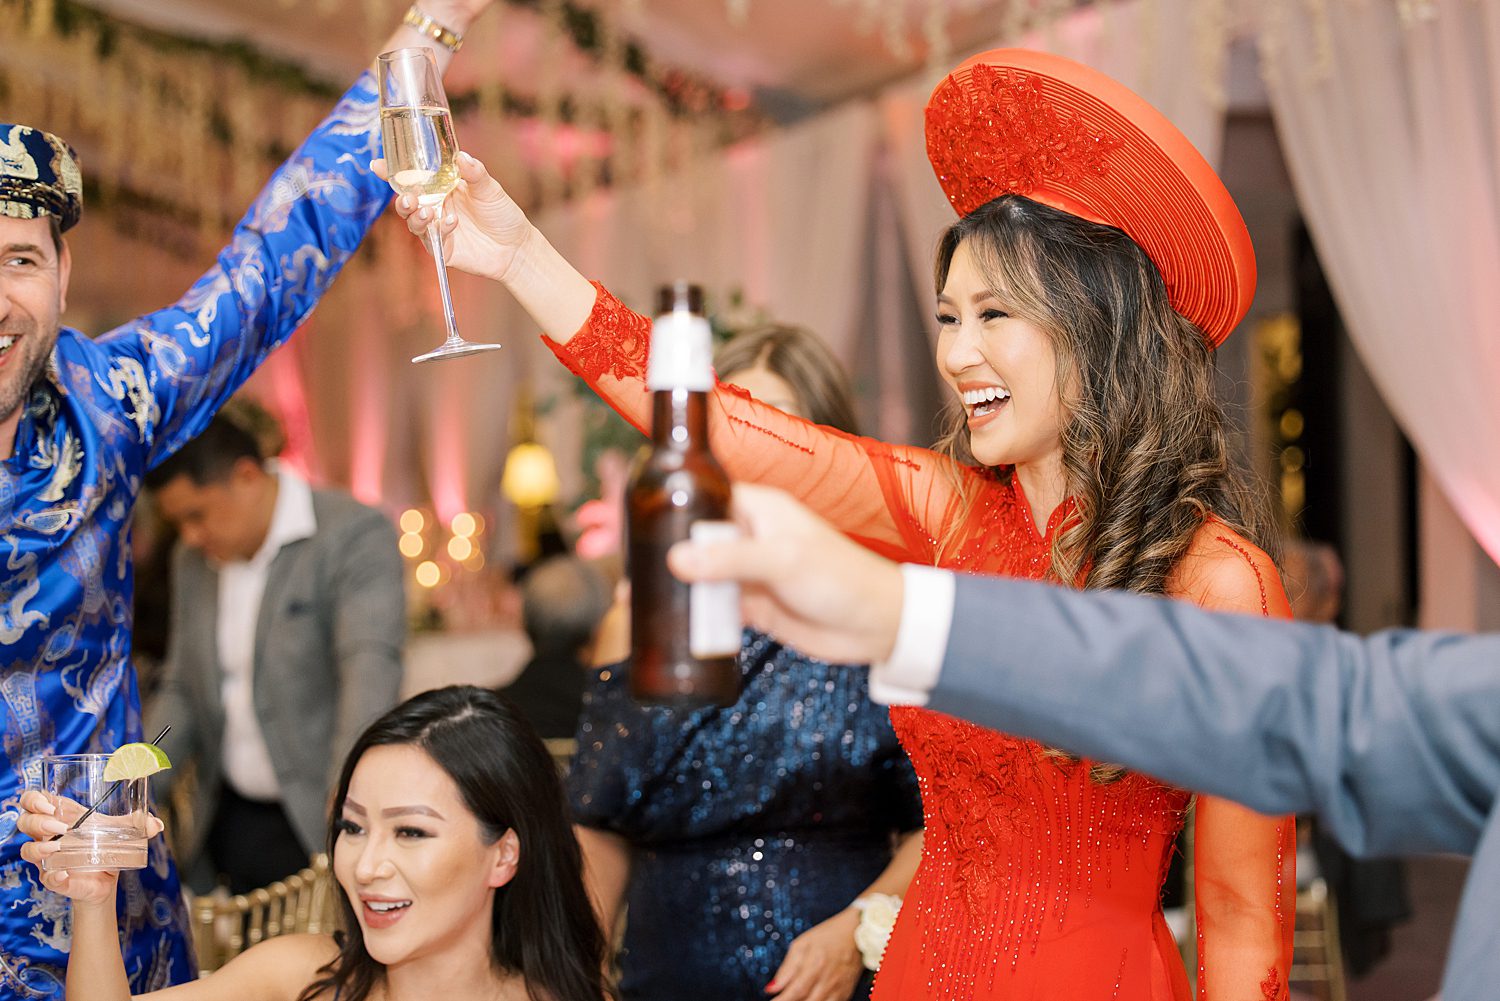 newlyweds in traditional Vietnamese wedding attire complete Chao Ban at wedding reception 